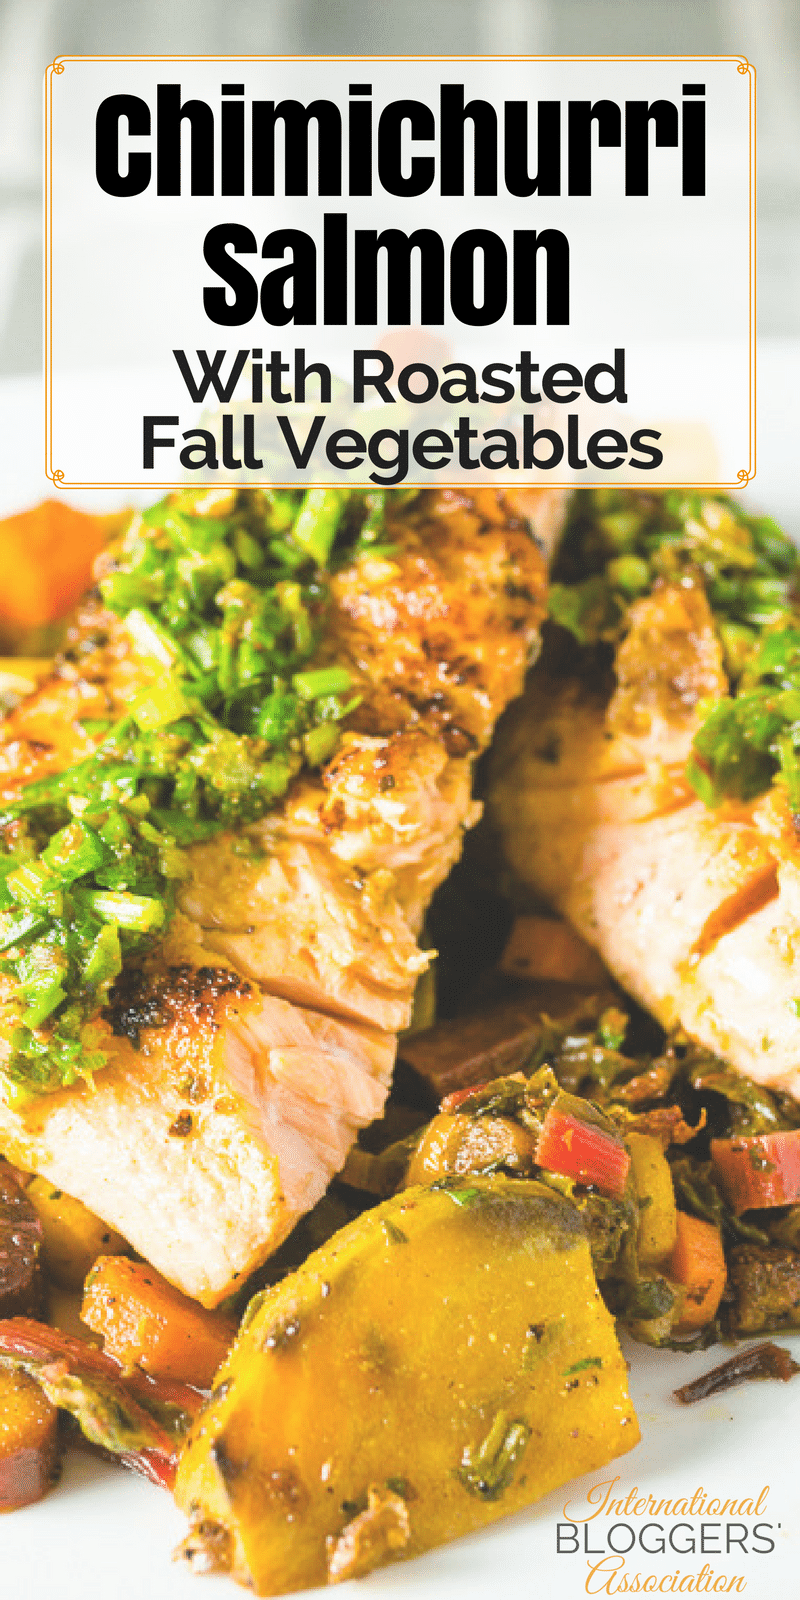 This salmon recipe is an ideal way to savor the fall vegetables. It is healthy and delicious all in one. Be sure to add it to your recipe book.